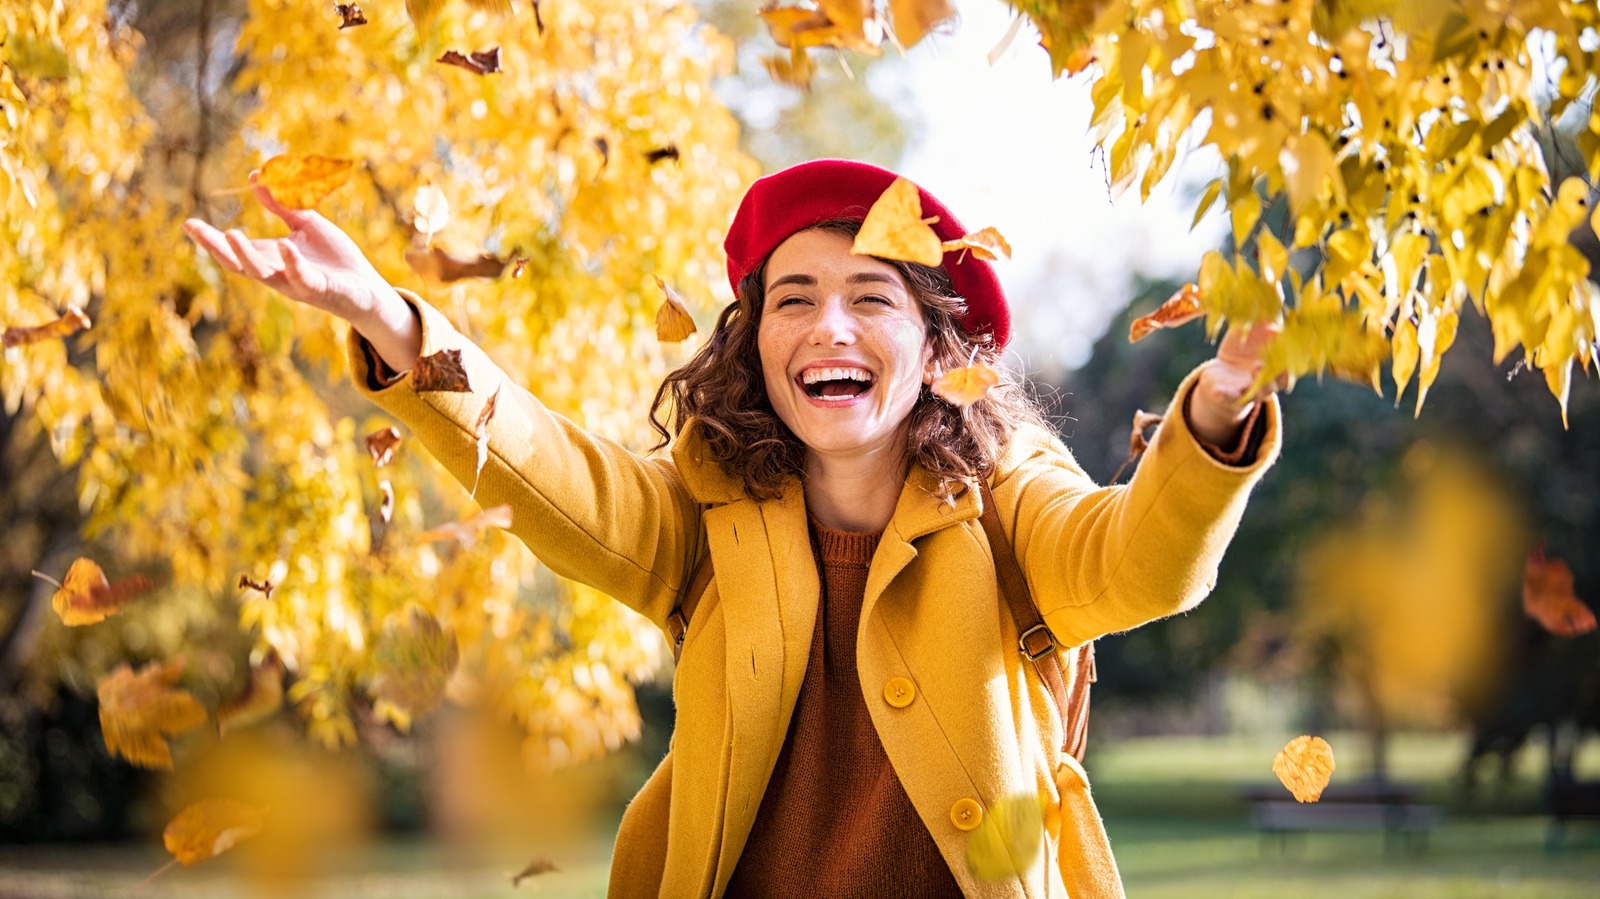 The Best Fall Activity For You Based On Your Zodiac Sign